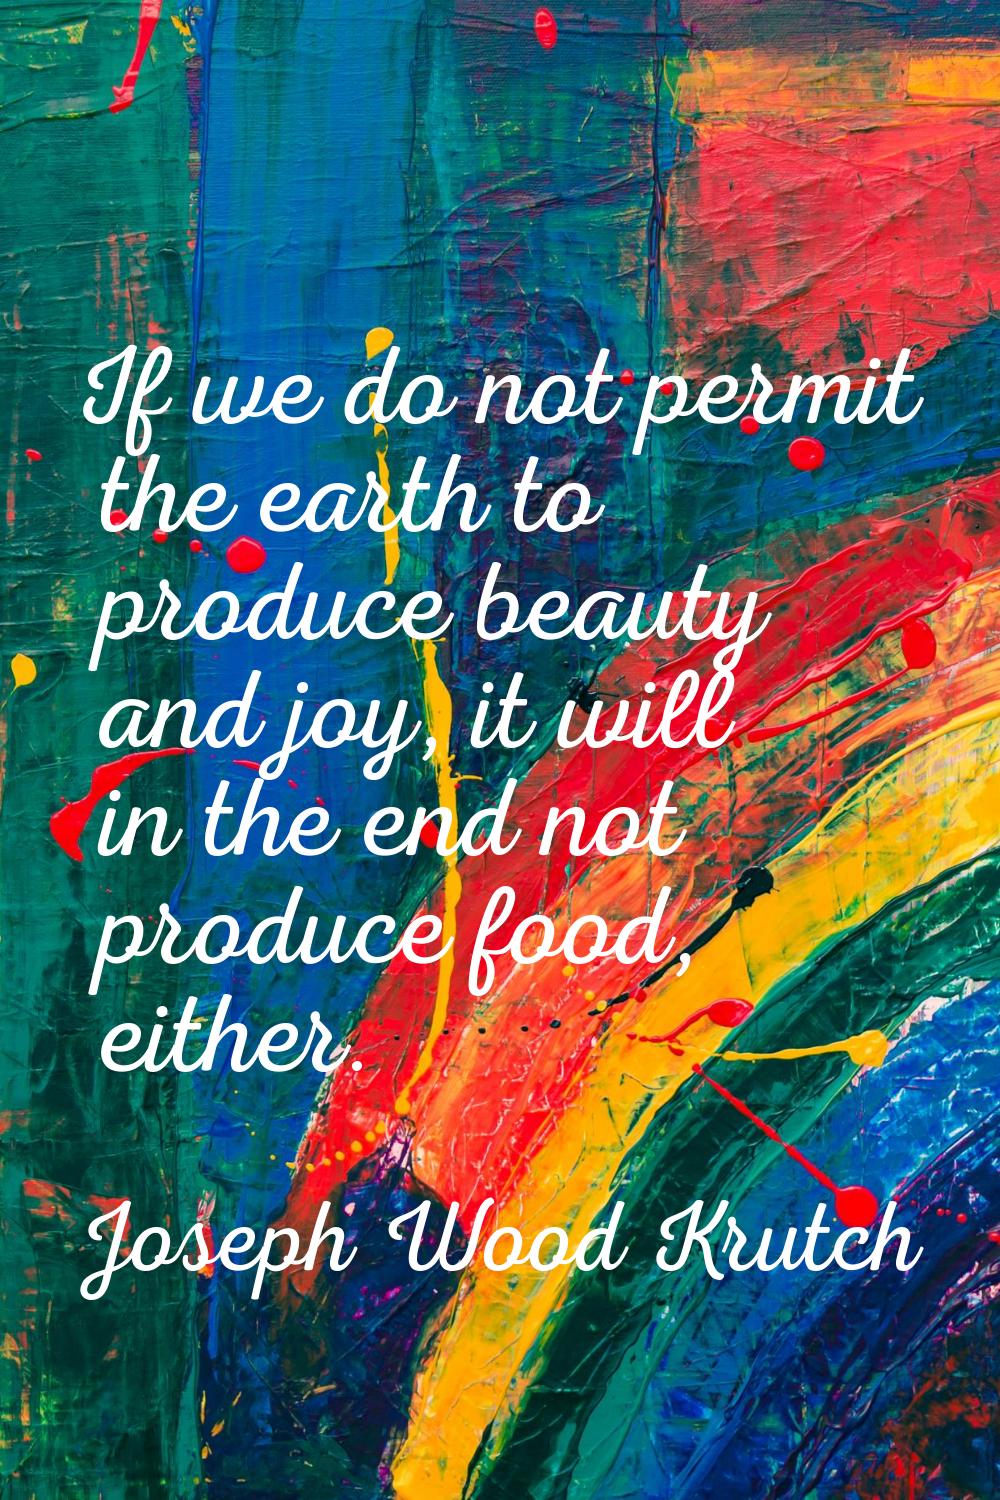 If we do not permit the earth to produce beauty and joy, it will in the end not produce food, eithe